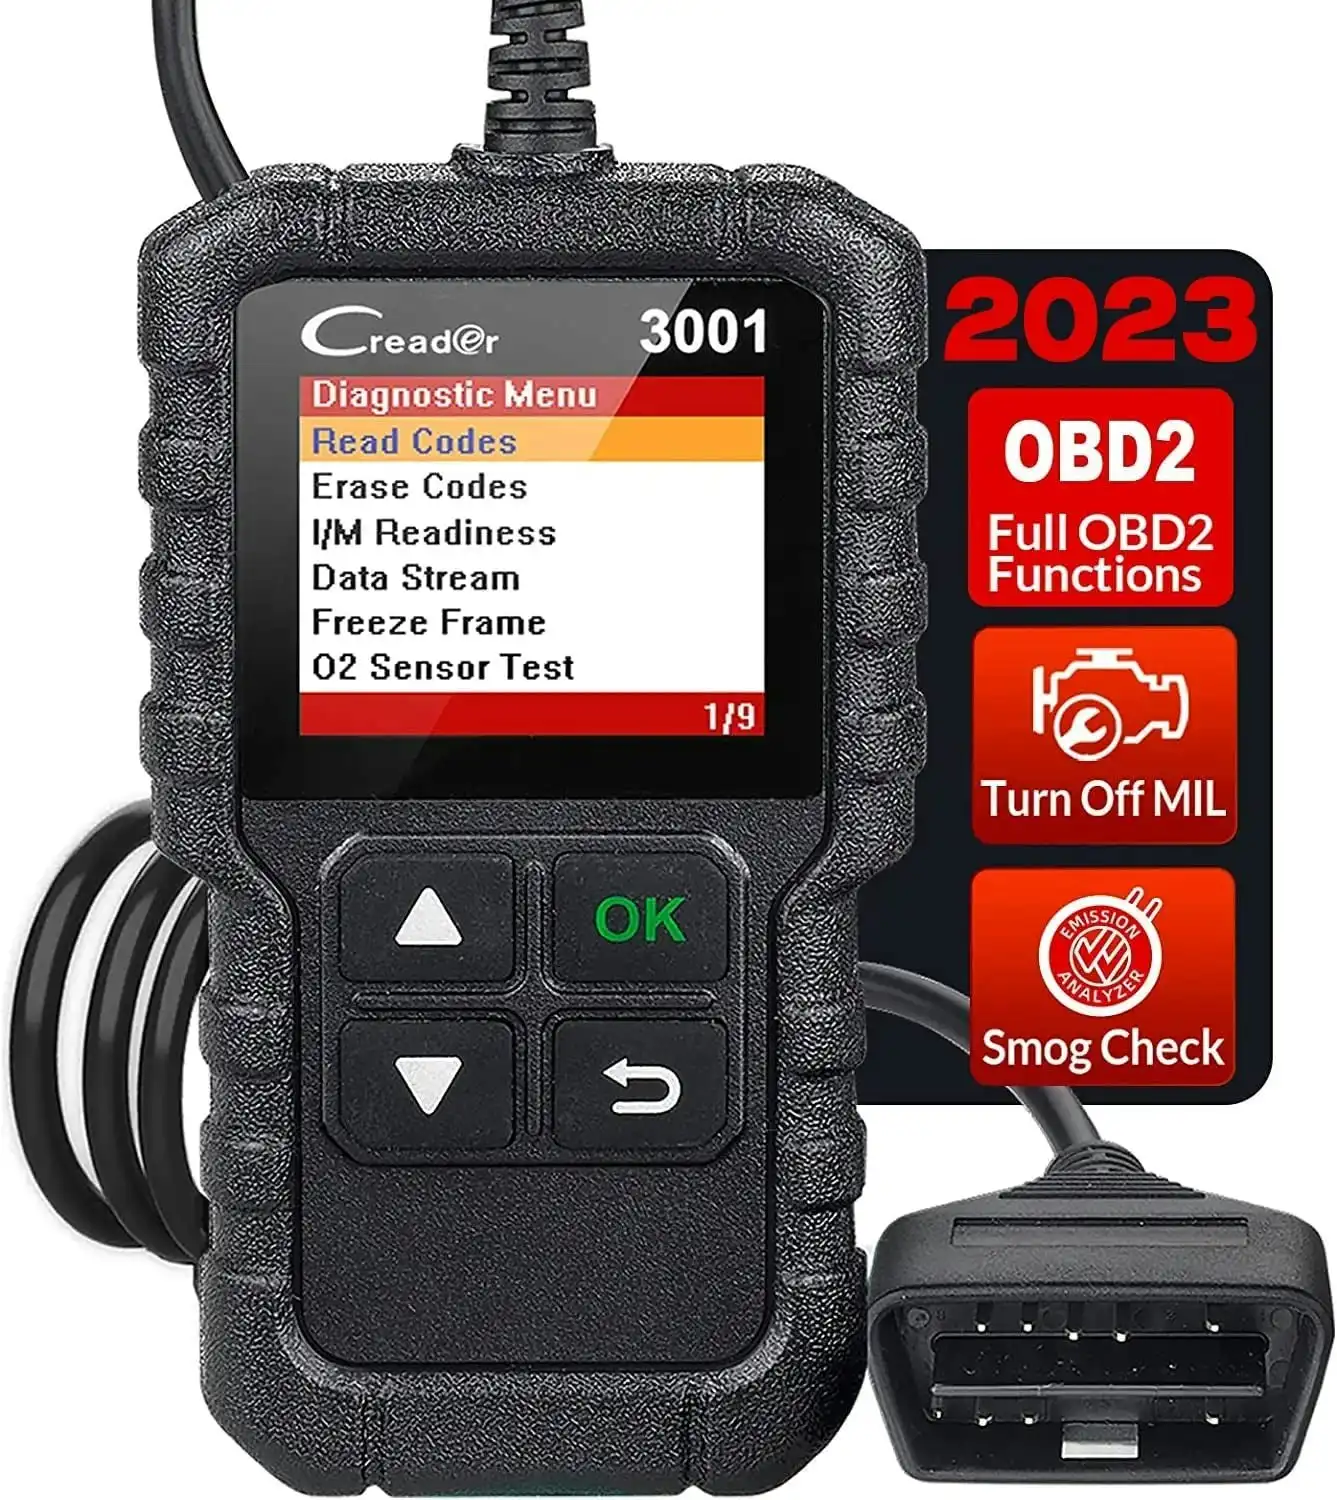 Launch Creader 3001 OBD2 Scanner, Engine Fault Code Reader Mode 6 CAN Diagnostic Scan Tool for All OBDII Protocol Cars since 1996, Lifetime Free Update